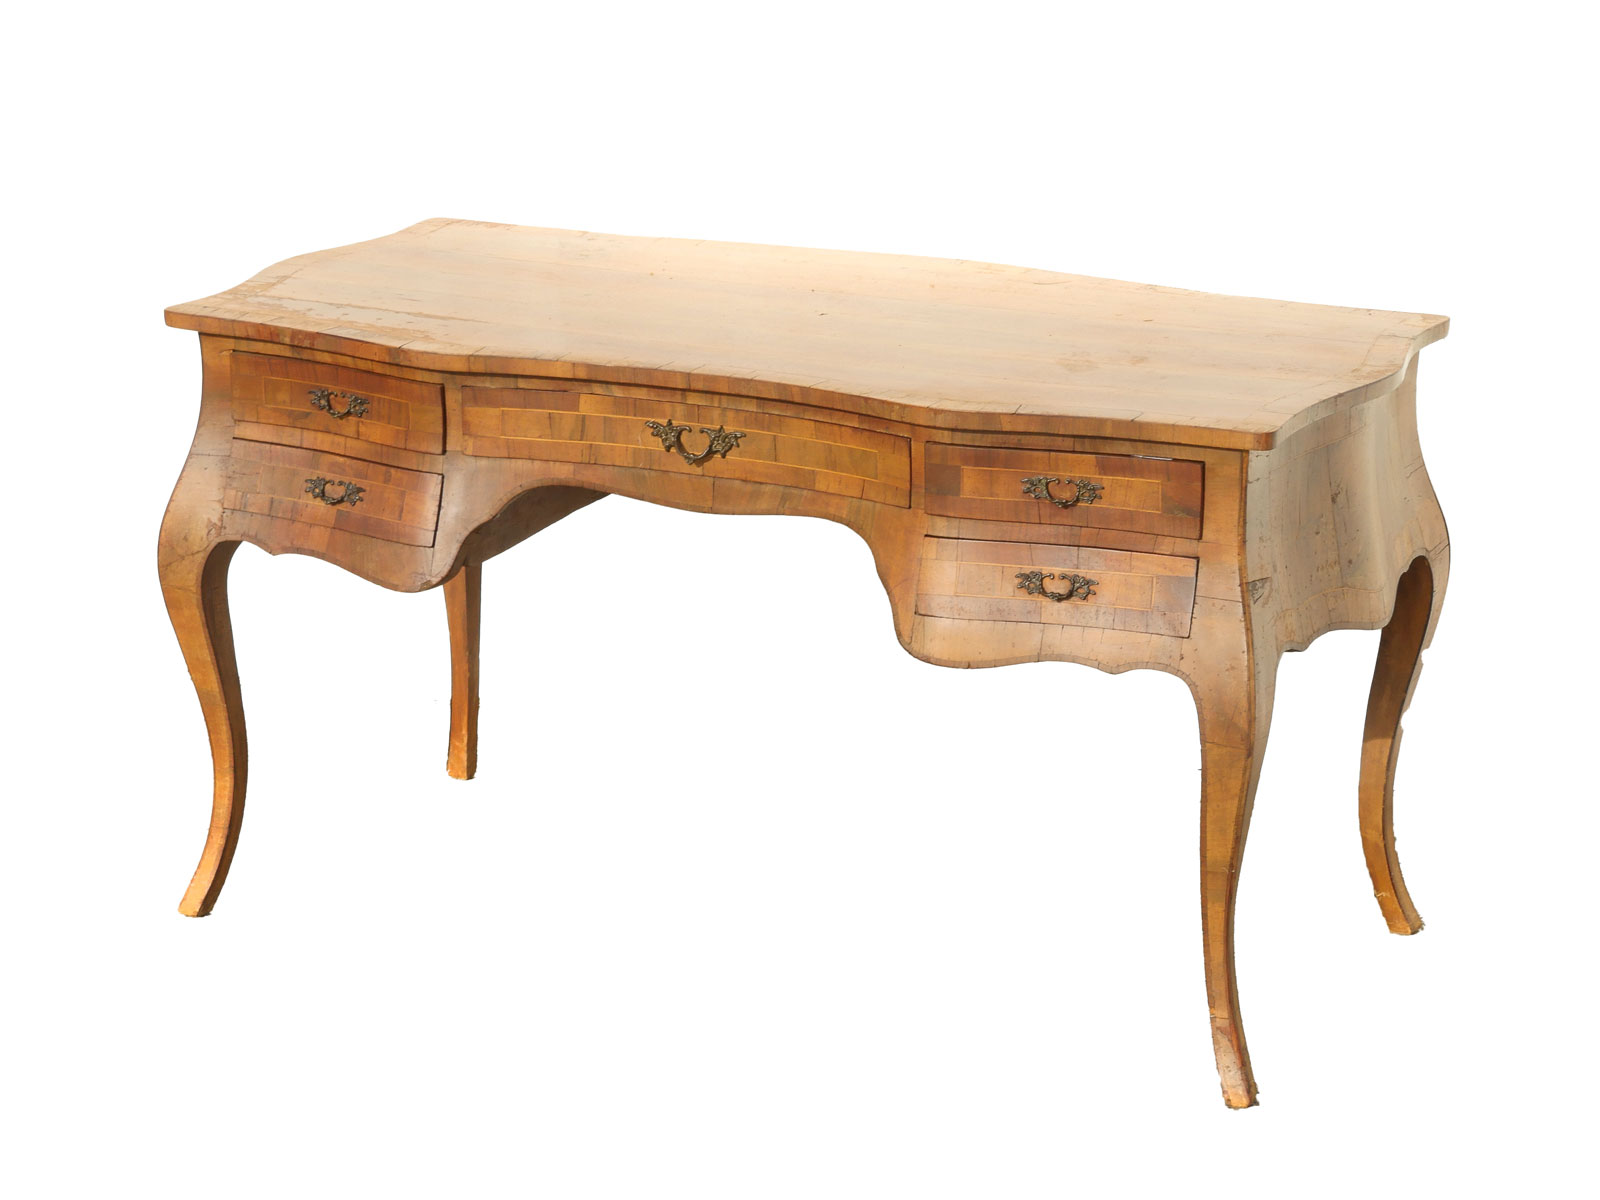 EARLY FRENCH DESK 19th century 36c025